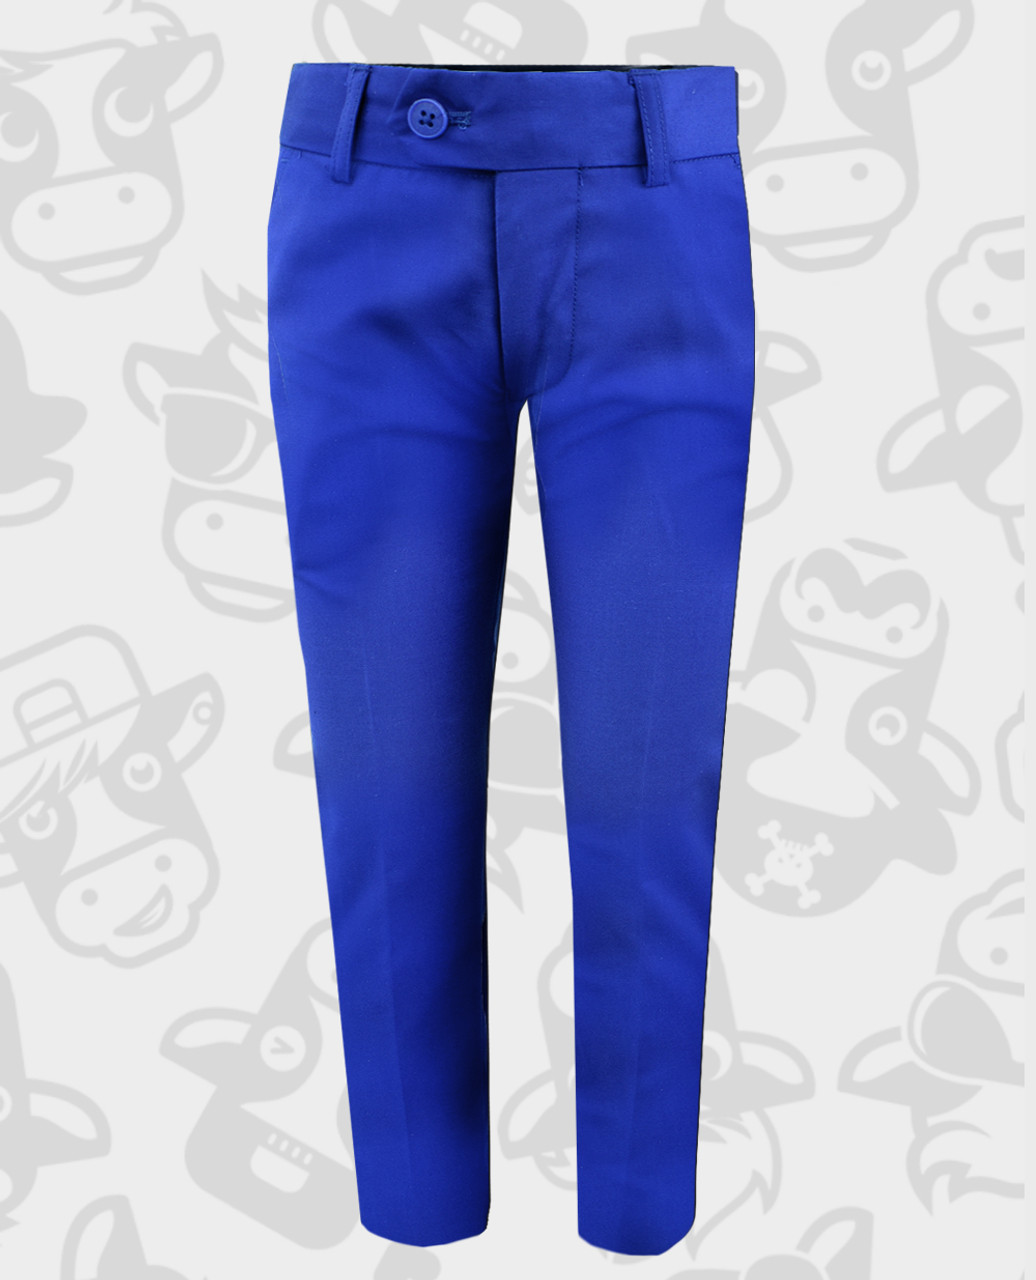 UK Boys Formal Blue Trousers For Suits Kids Plain Blue Trousers For Suit